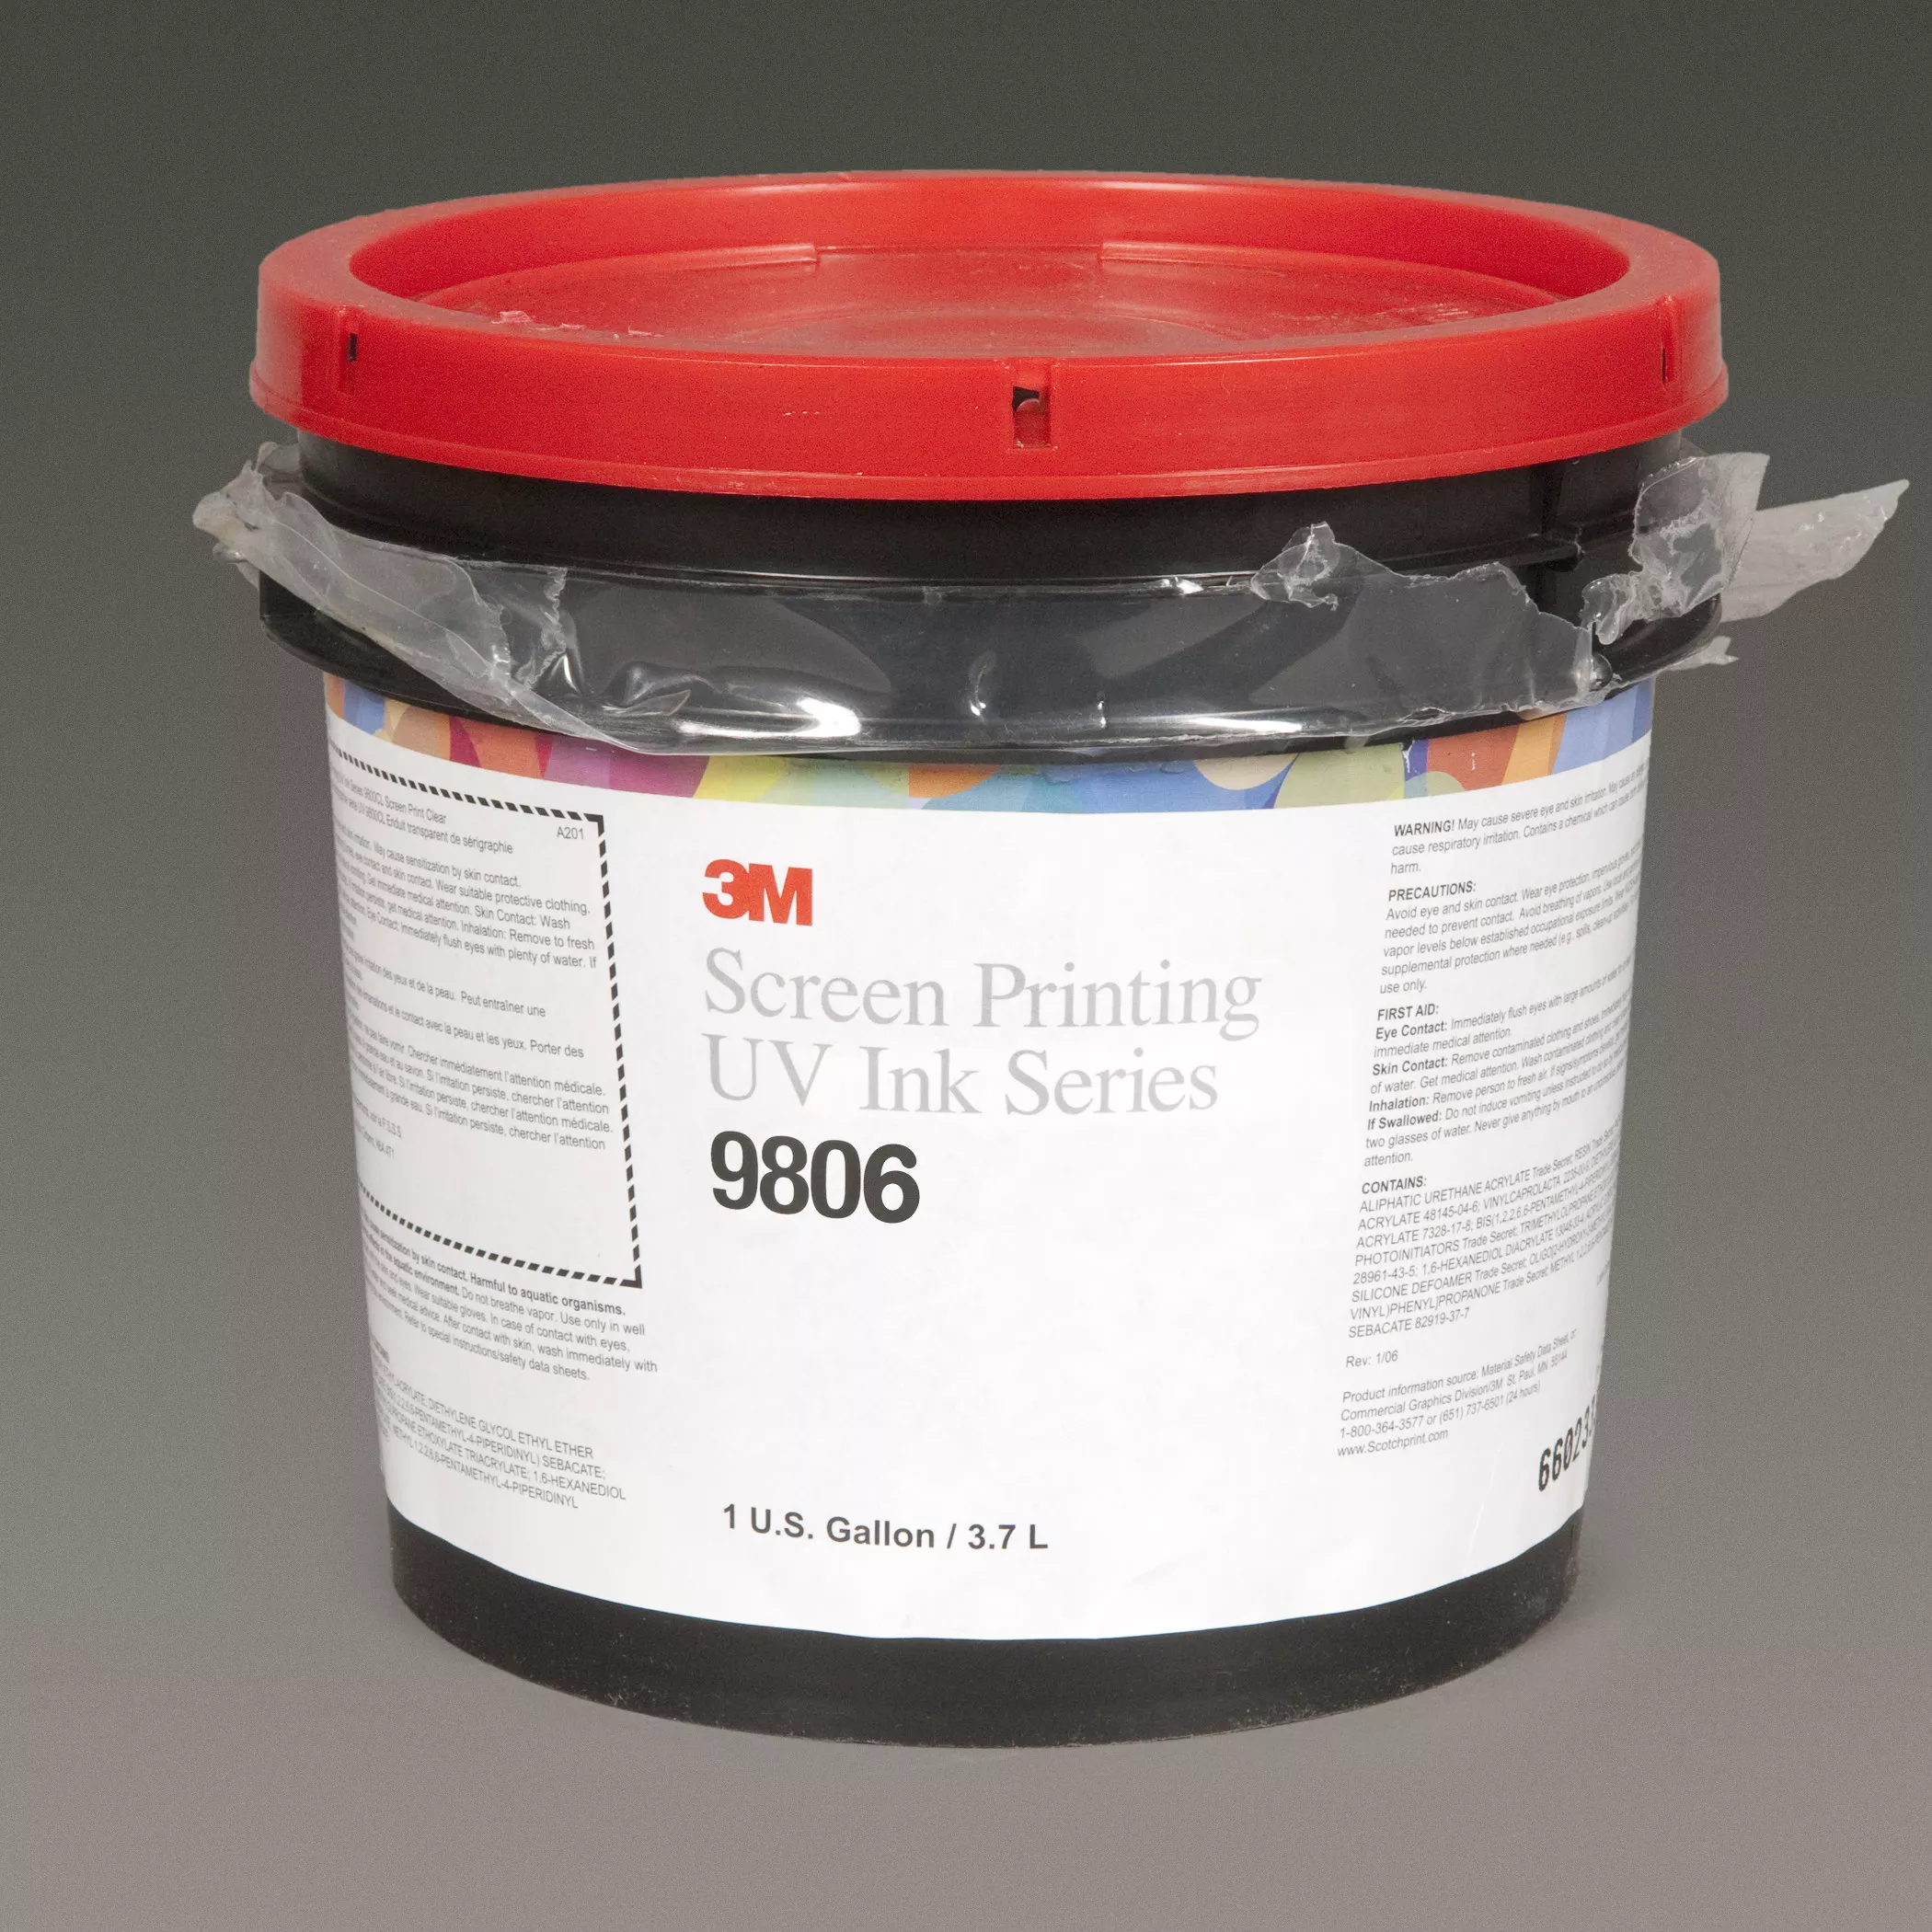 3M™ Screen Printing UV Ink 9806, Mixing White, 1 Gallon Container